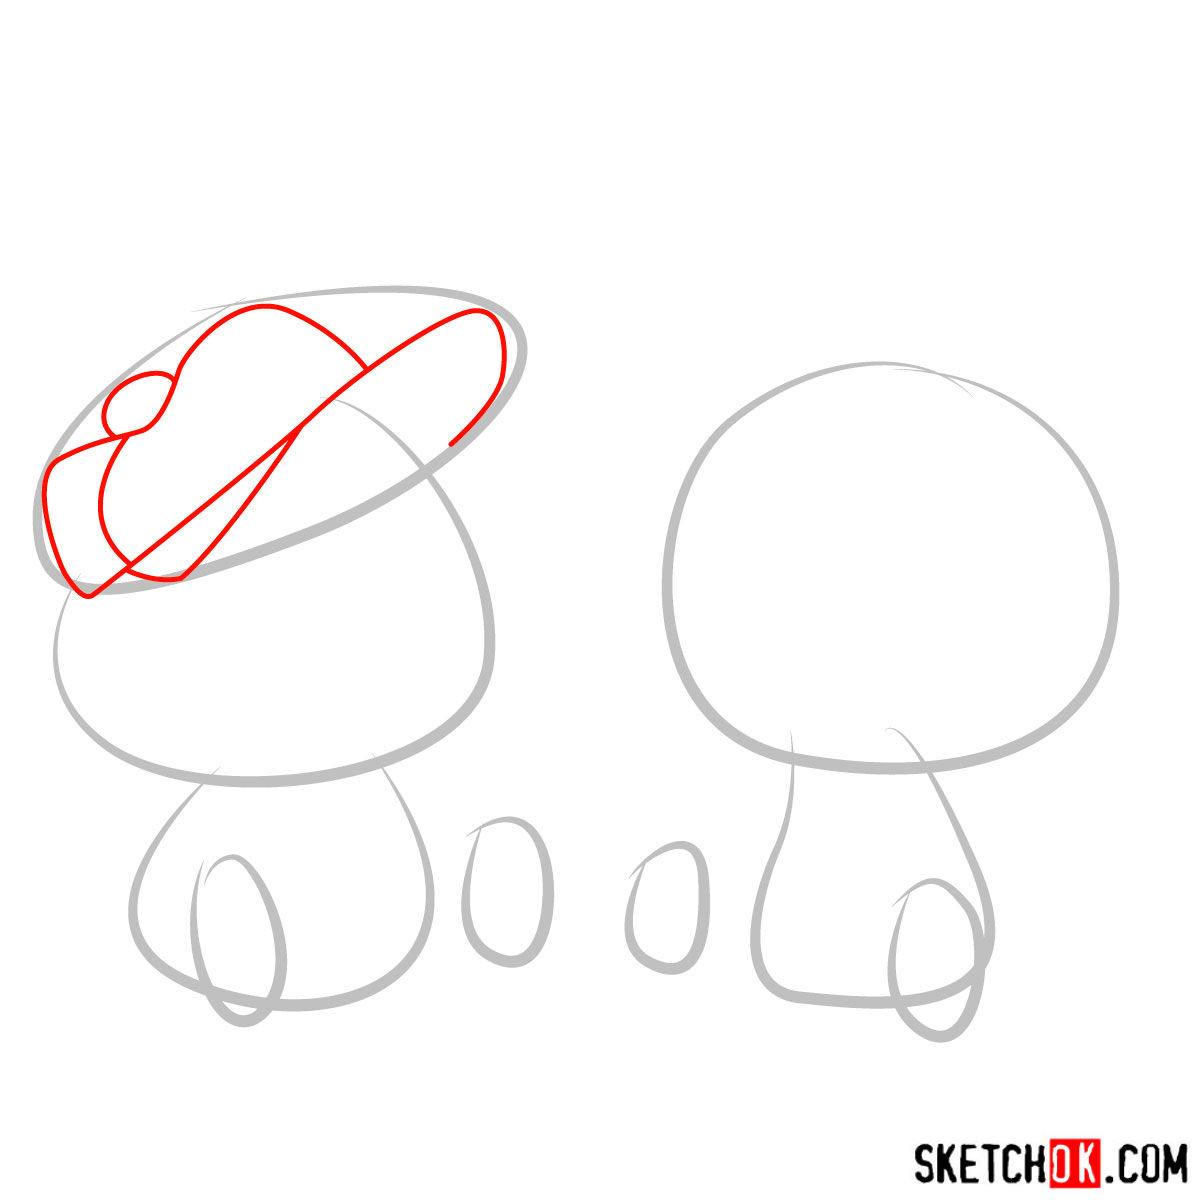 How to draw Dipper and Mabel Pines chibi style - step 02